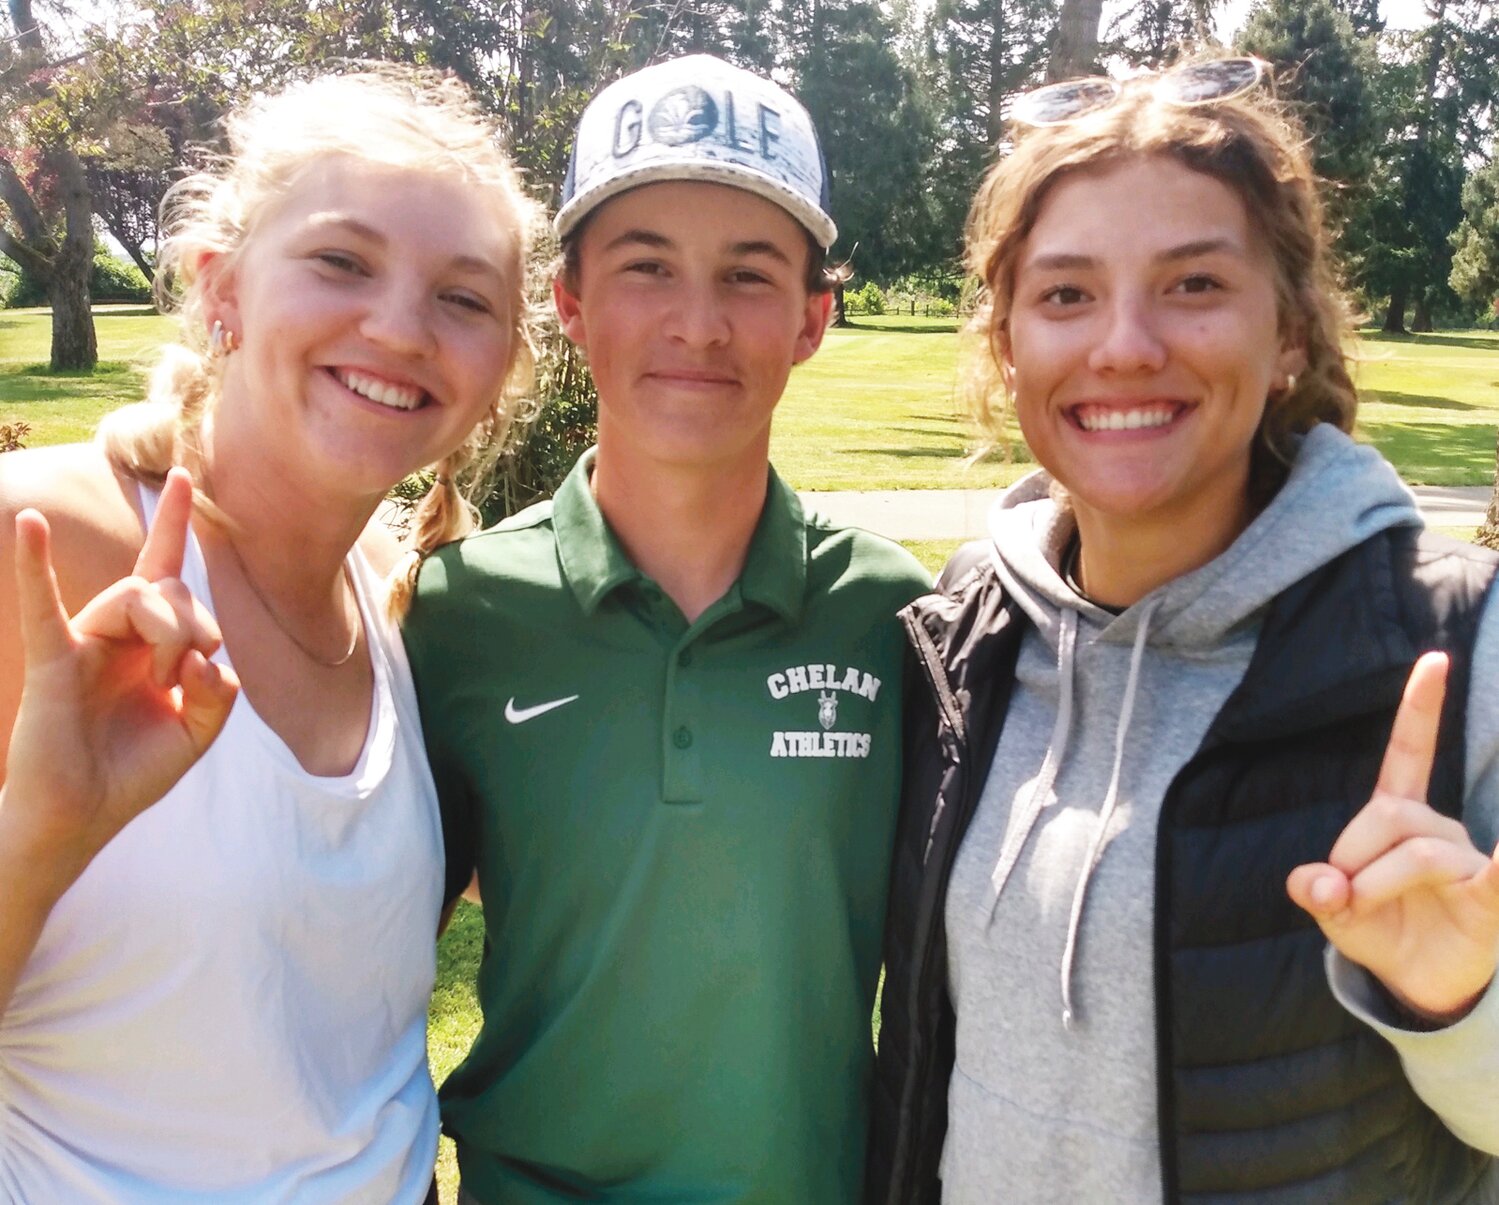 Left to right: Arabelle Finch, Carson Clinton and Kira Sandoval  after the awards ceremony at the State Golf Tournament held in Chehalis.
Courtesy Chelan High School Golf